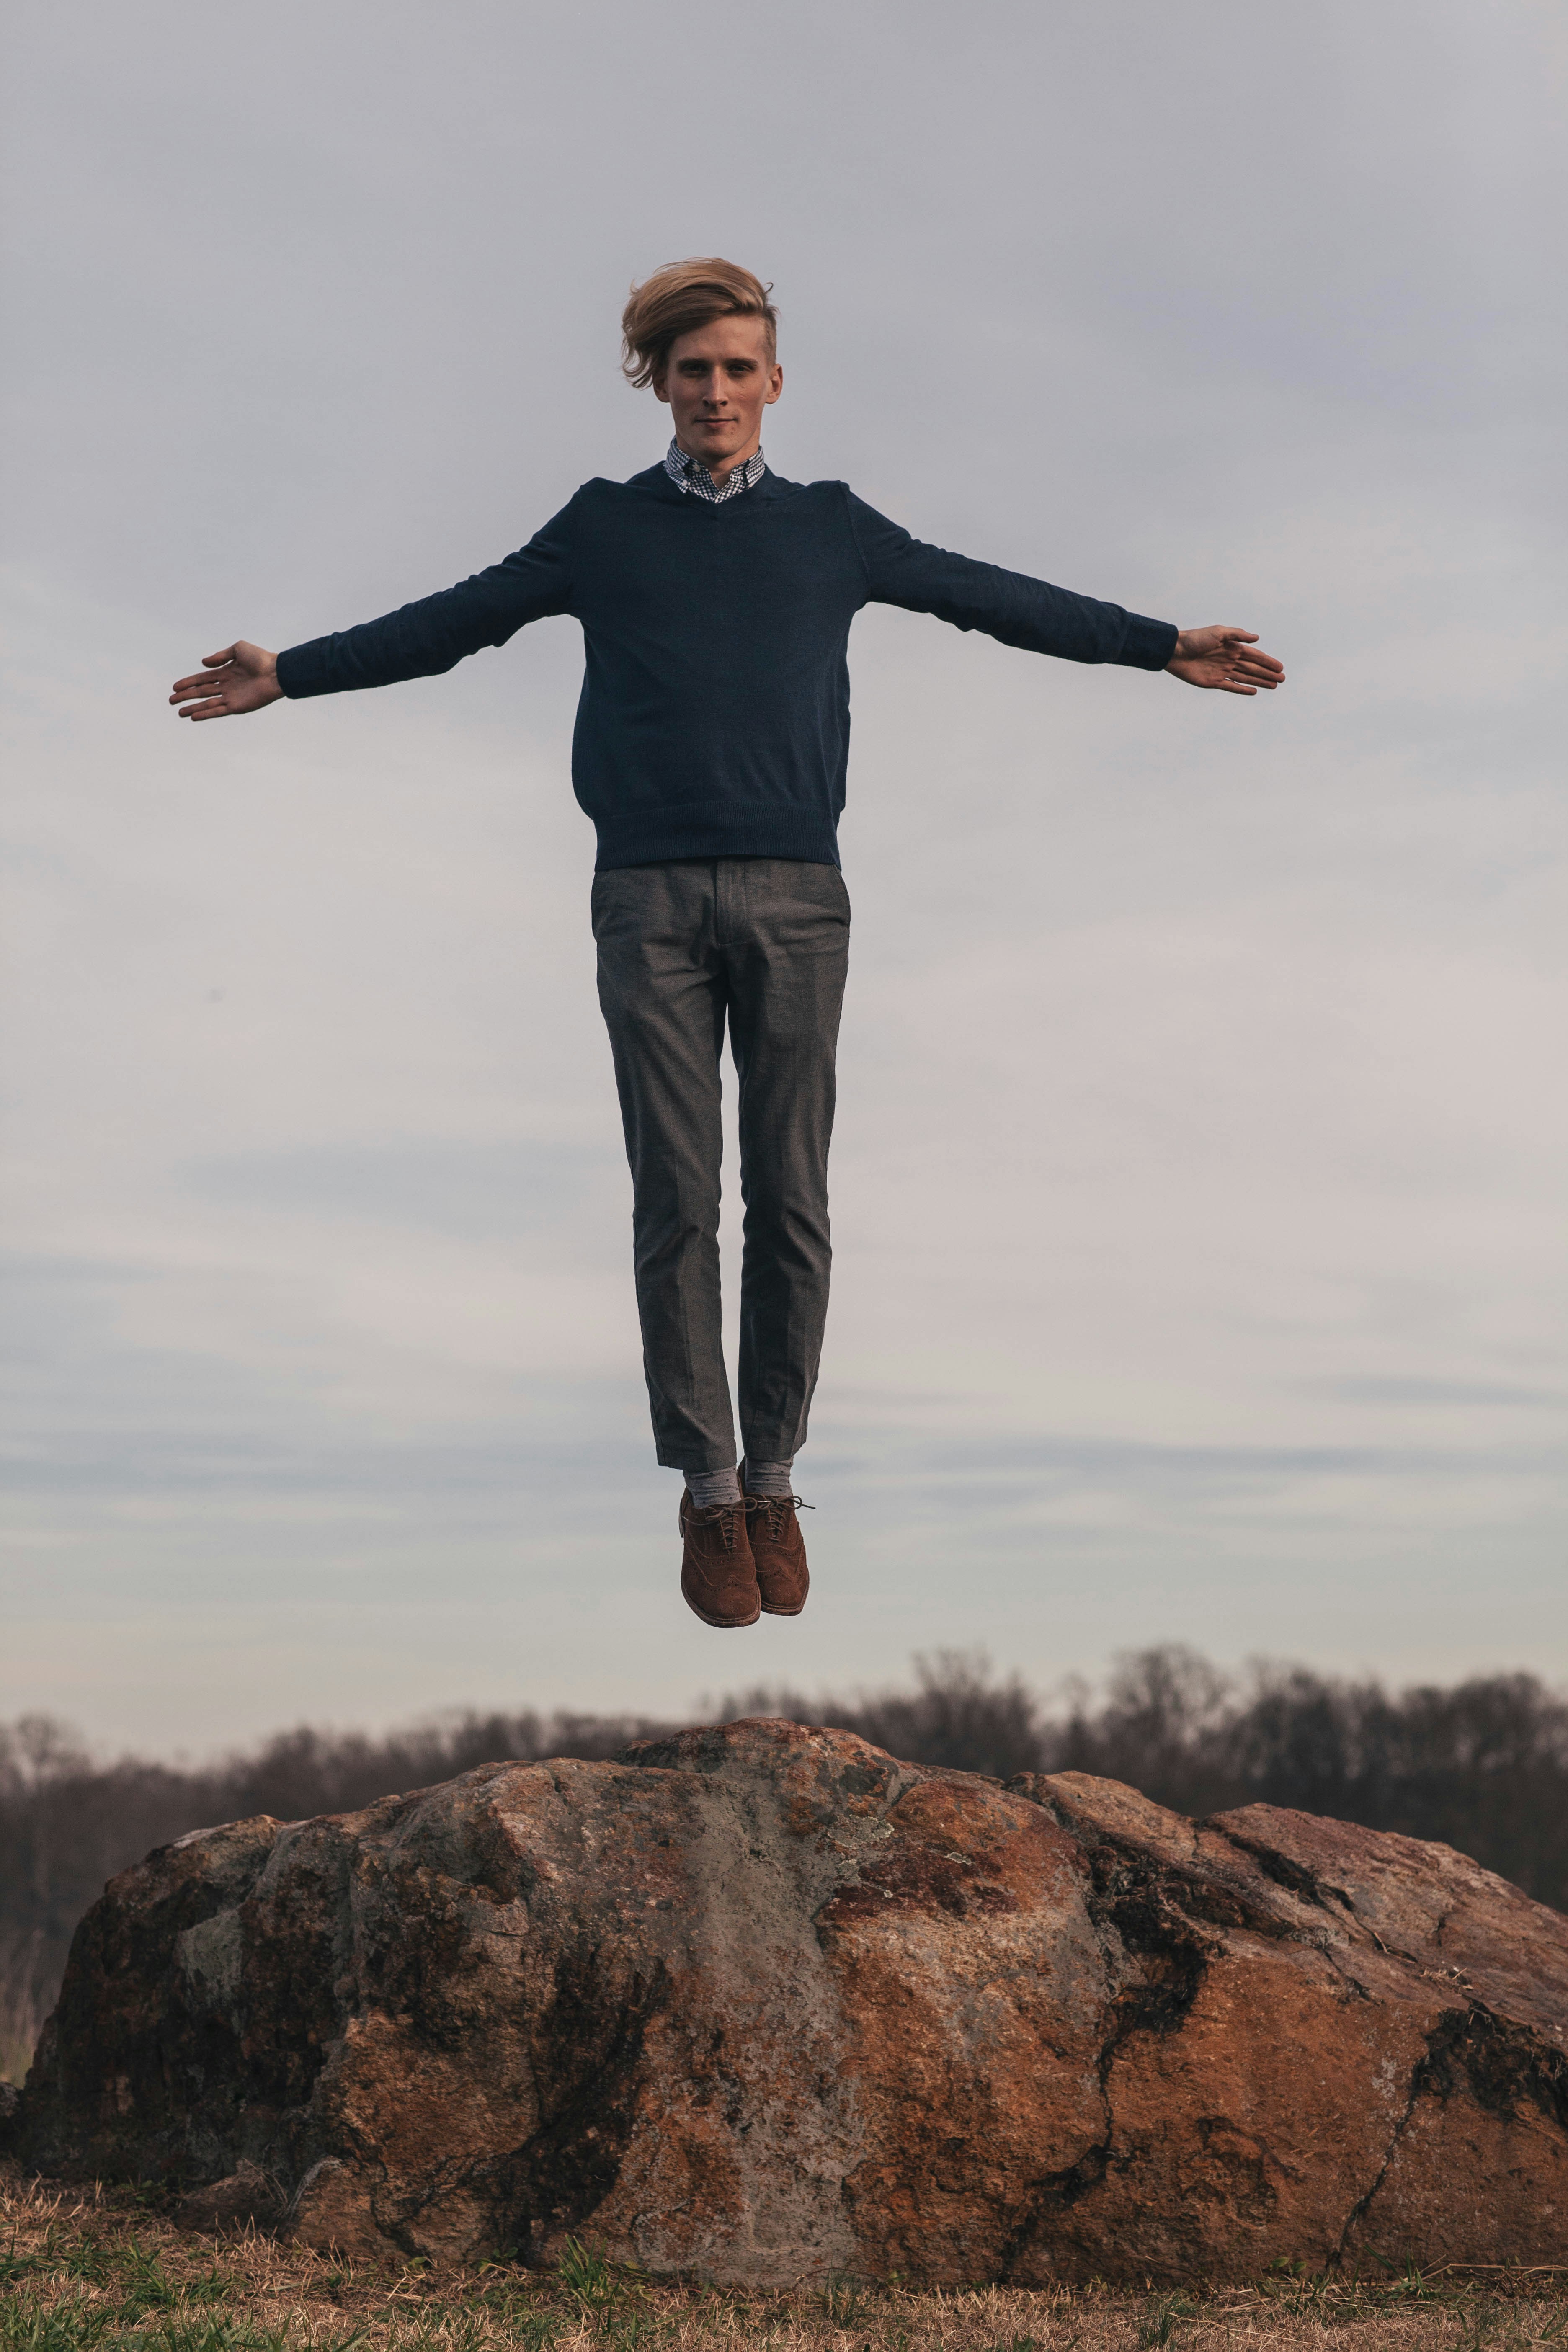 great photo recipe,how to photograph man jumping while open arms